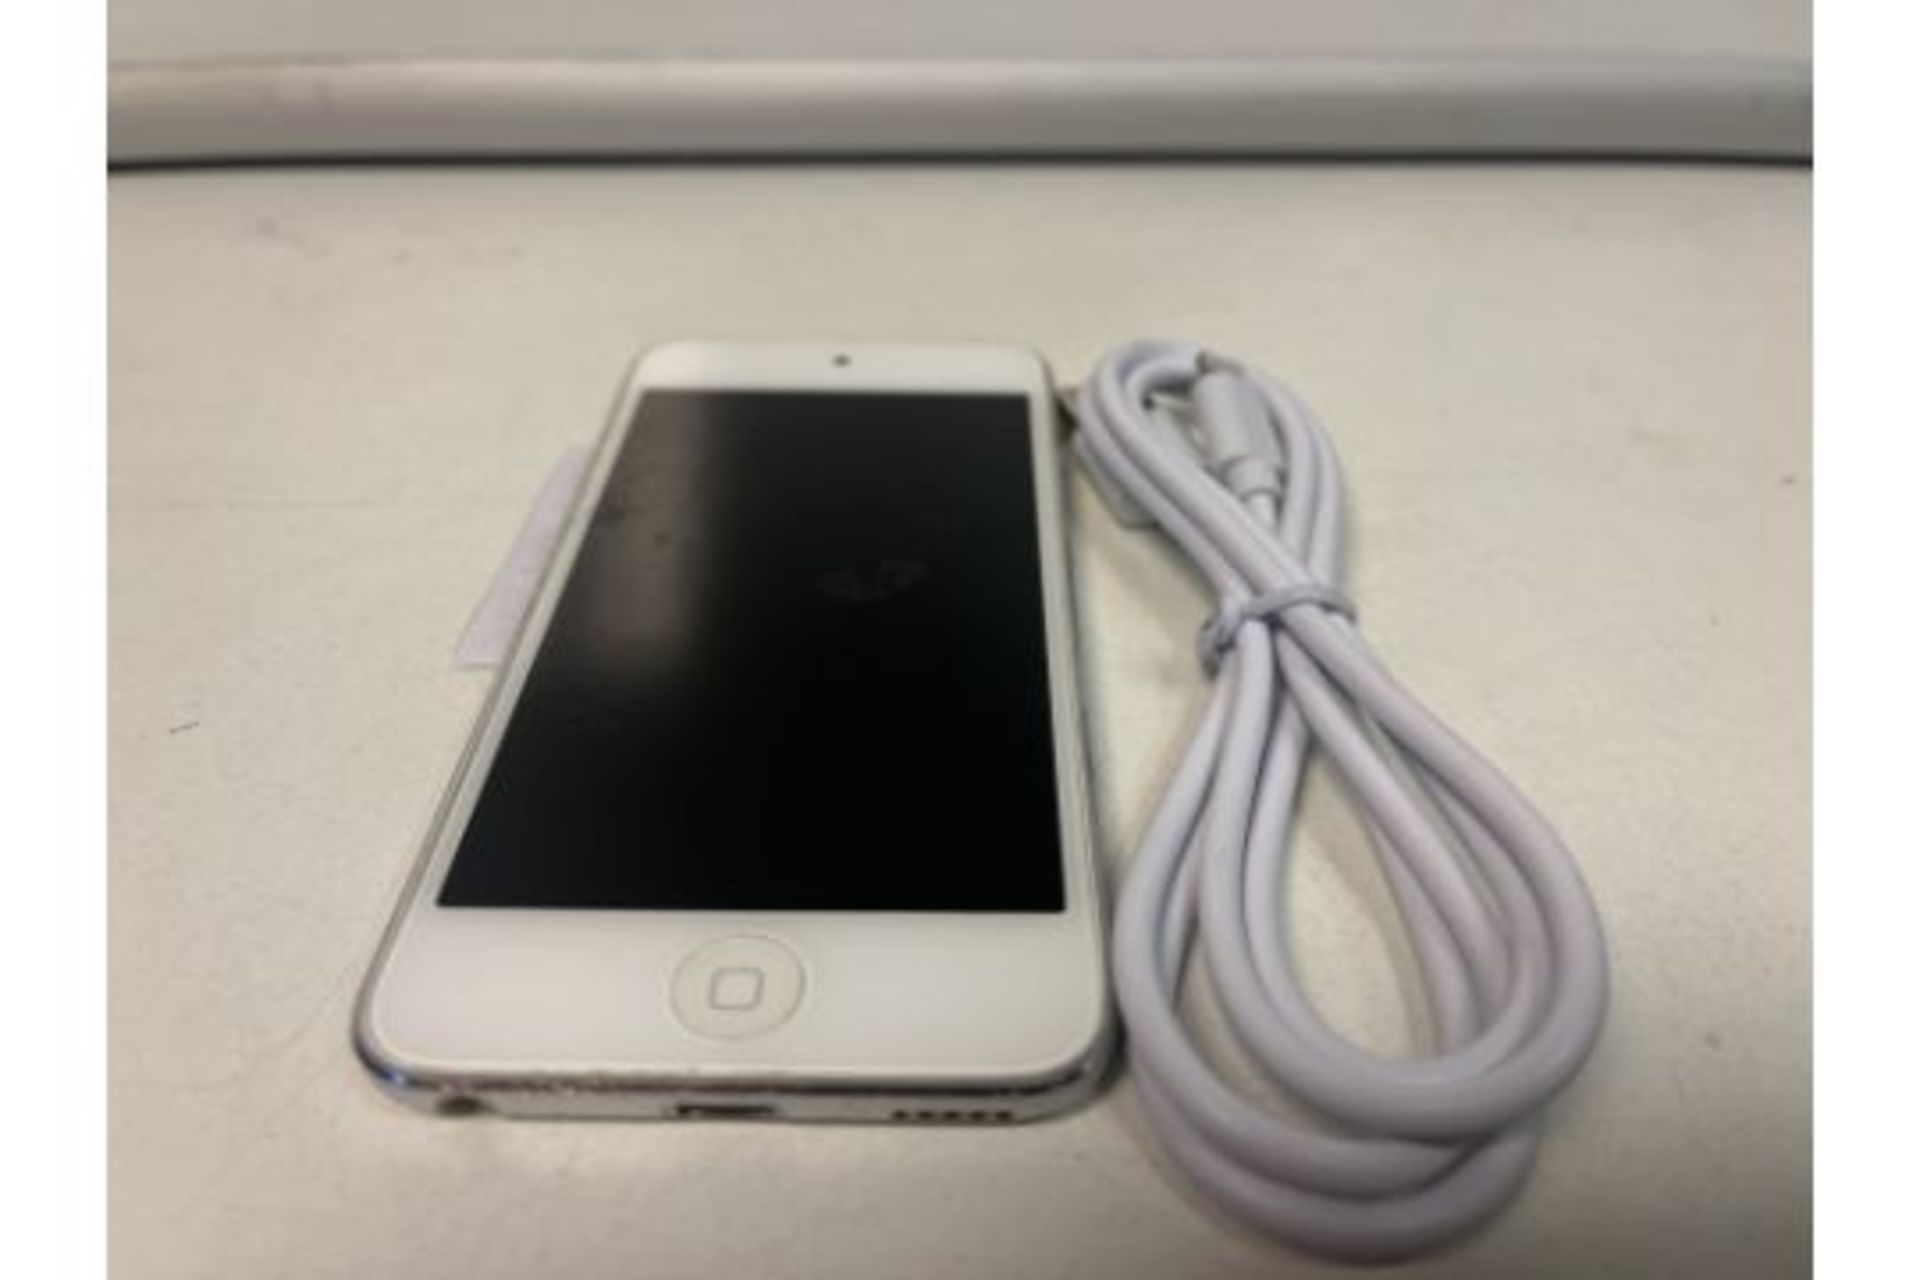 APPLE IPOD TOUCH, 5TH GEN, 32GB STORAGE WITH CHARGE CABLE (48)